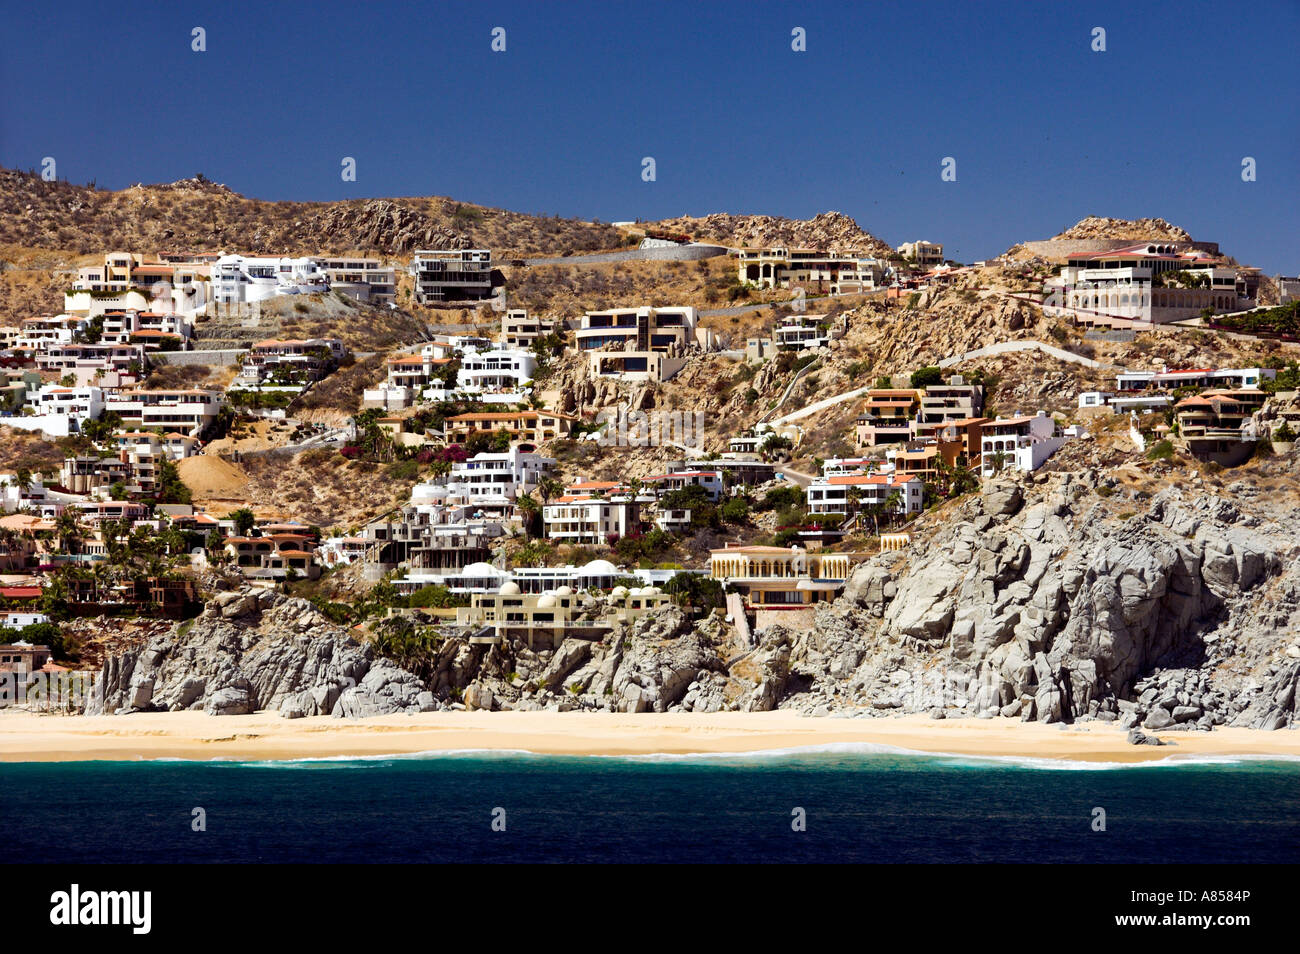 Housing complexes and condominiums at the resort of Cabo San Lucas Mexico Stock Photo